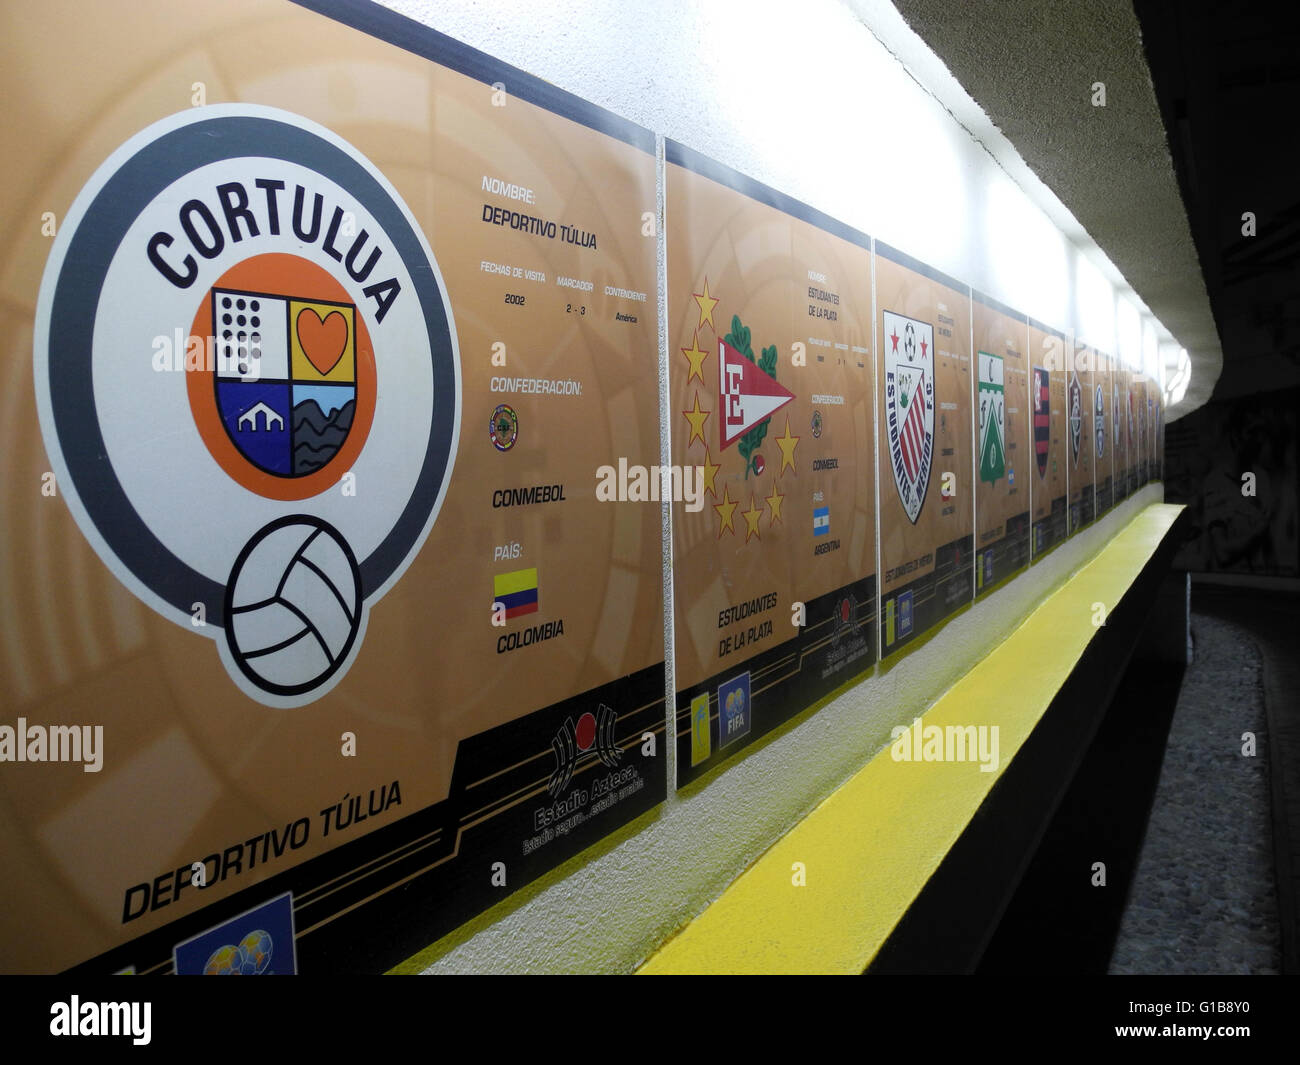 Mexico City, Mexico. 4th May, 2016. A gallery in the catacombs of the Estadio Azteca recalls all the clubs that have played in the stadium in Mexico City, Mexico, 4 May 2016. The Estadio Azteca opened in 1966. Photo: Denis Duettmann/dpa/Alamy Live News Stock Photo